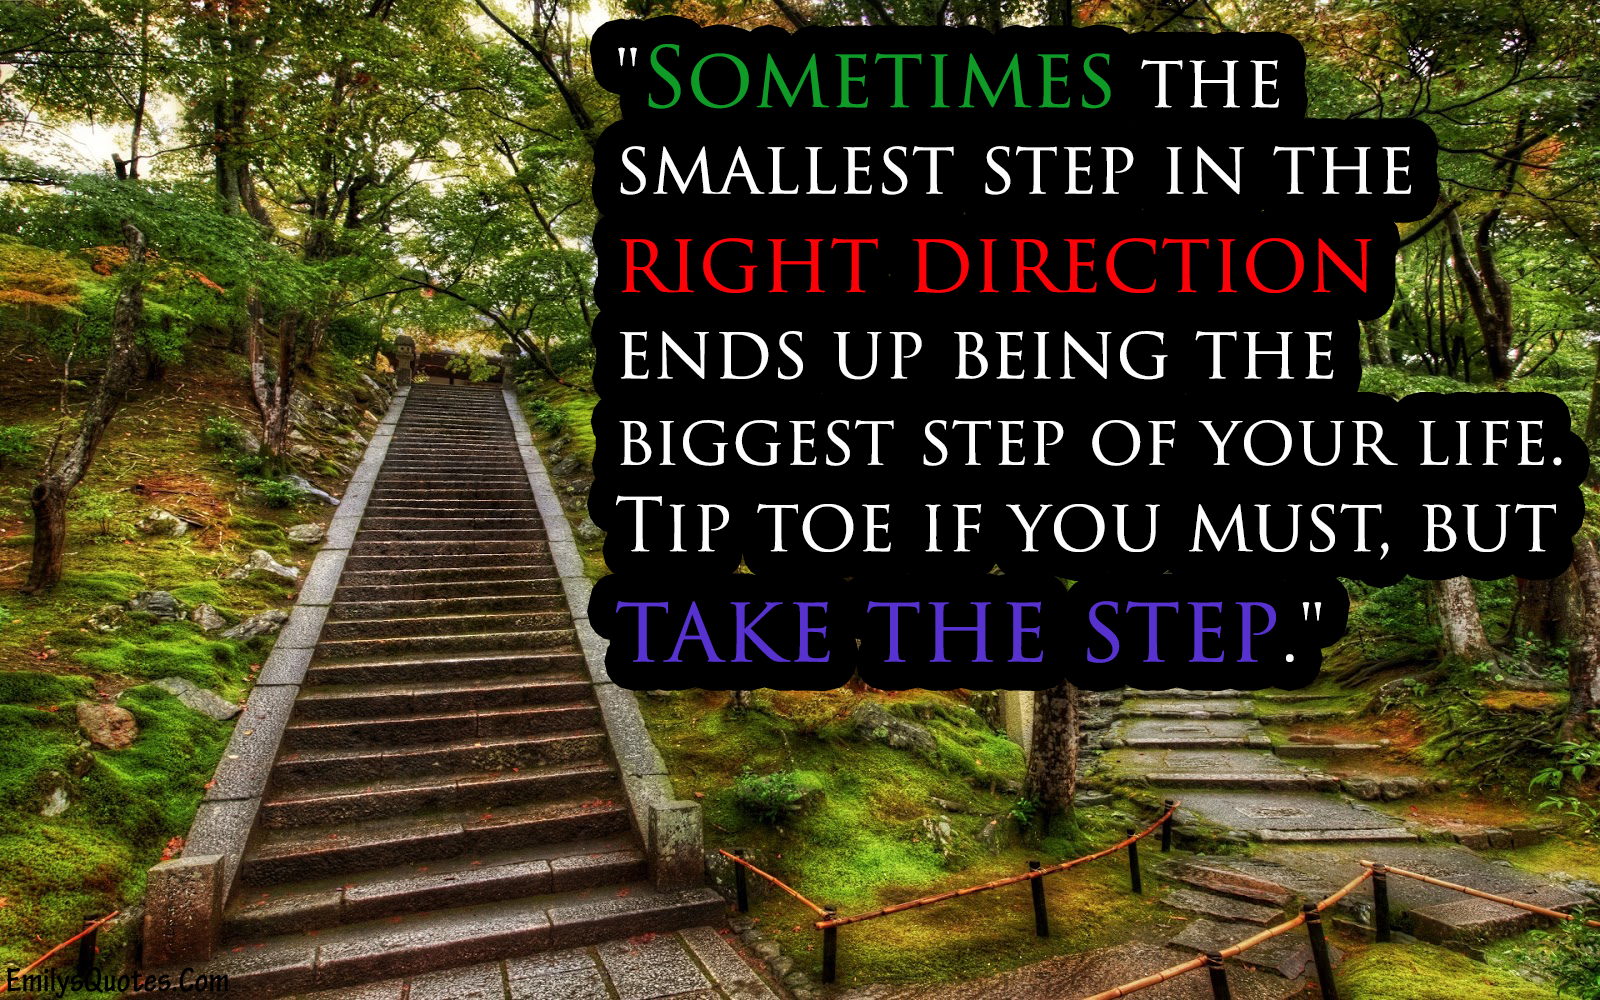 Sometimes the smallest step in the right direction ends up being the biggest